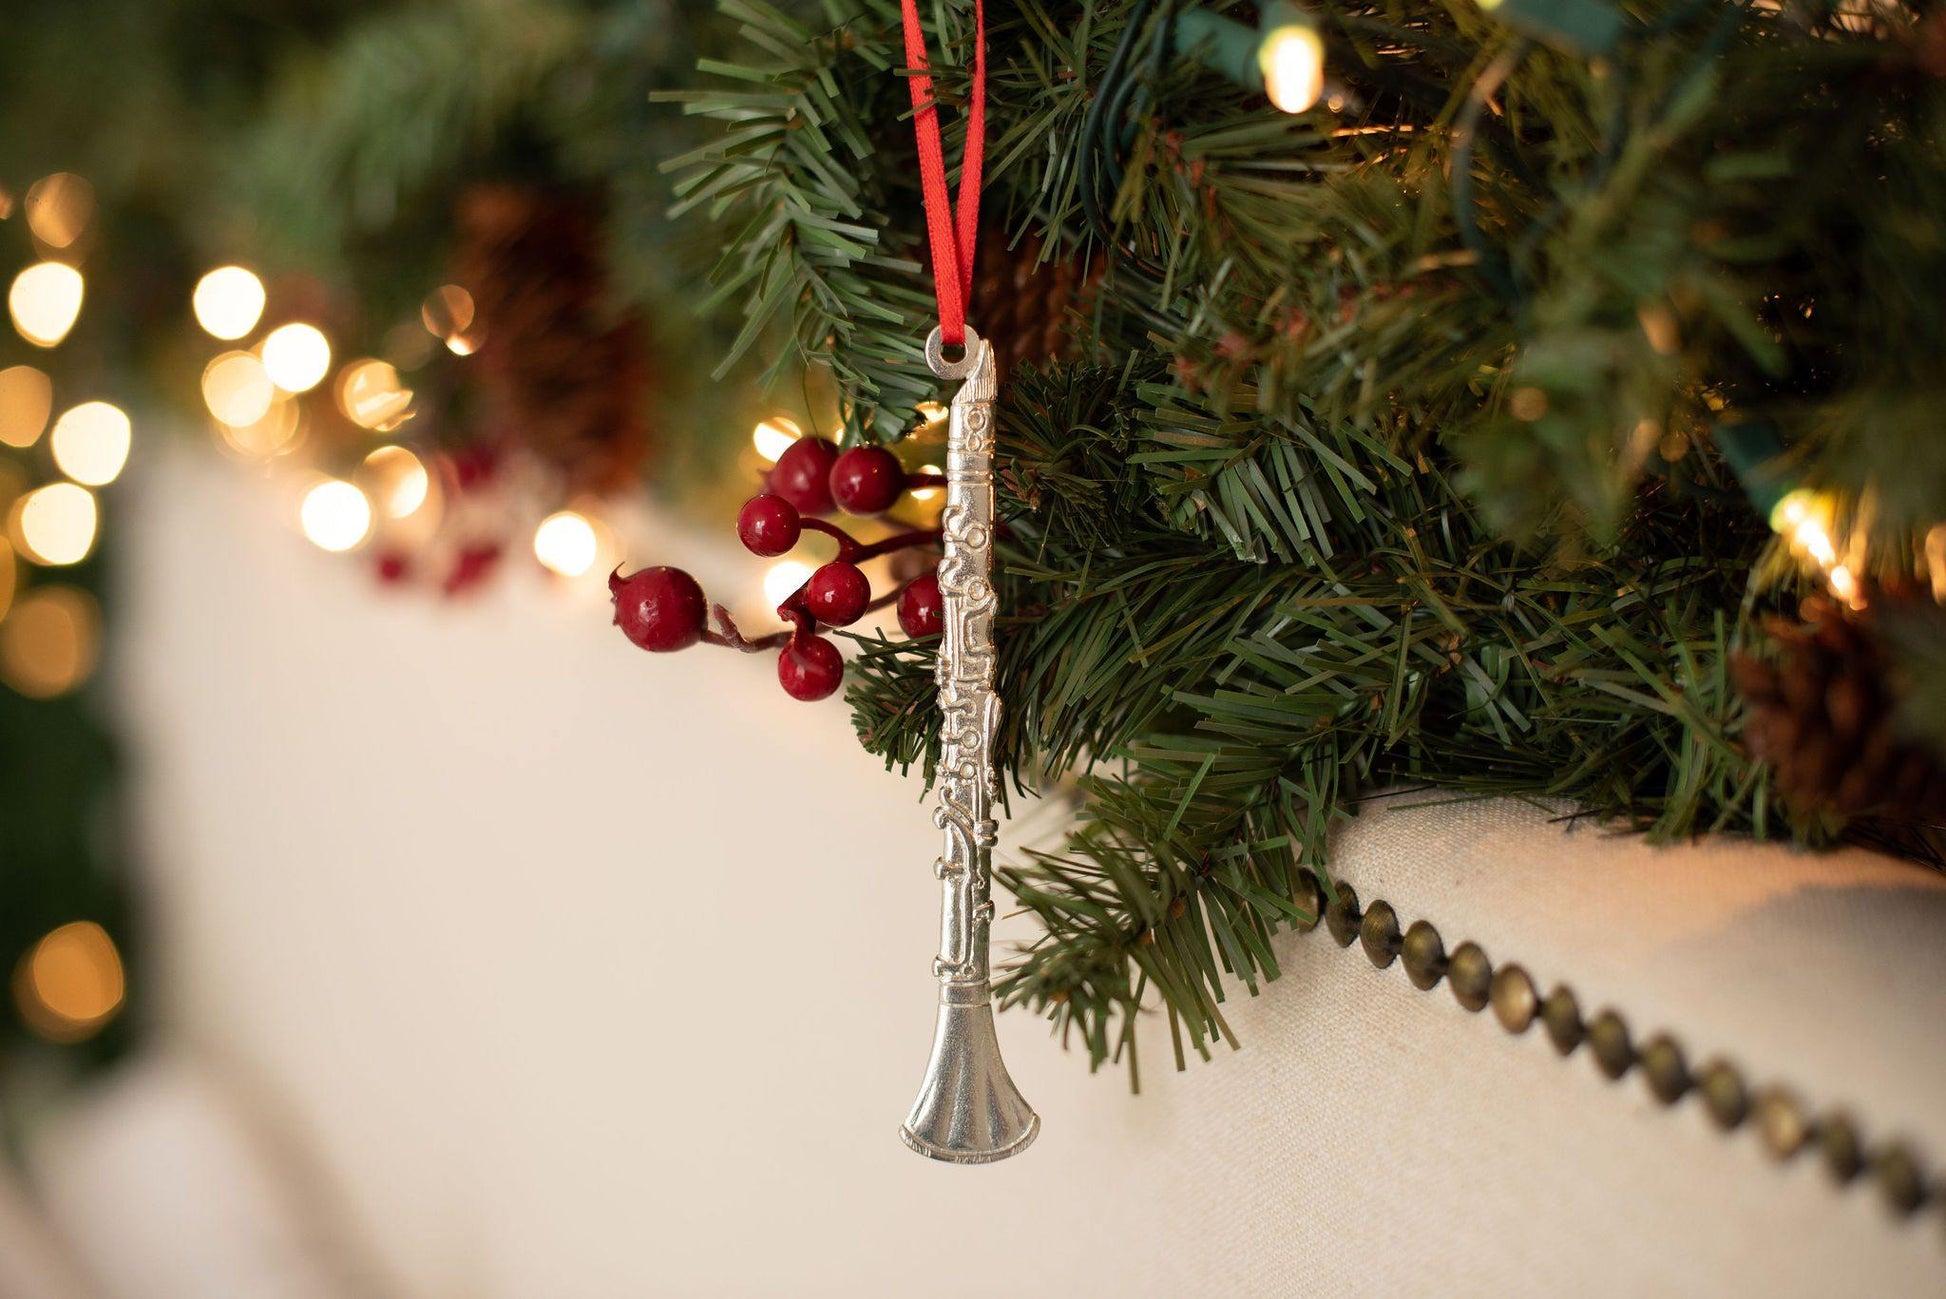 Handmade Clarinet Music Instrument Christmas Ornament Pewter - House of Morgan Pewter